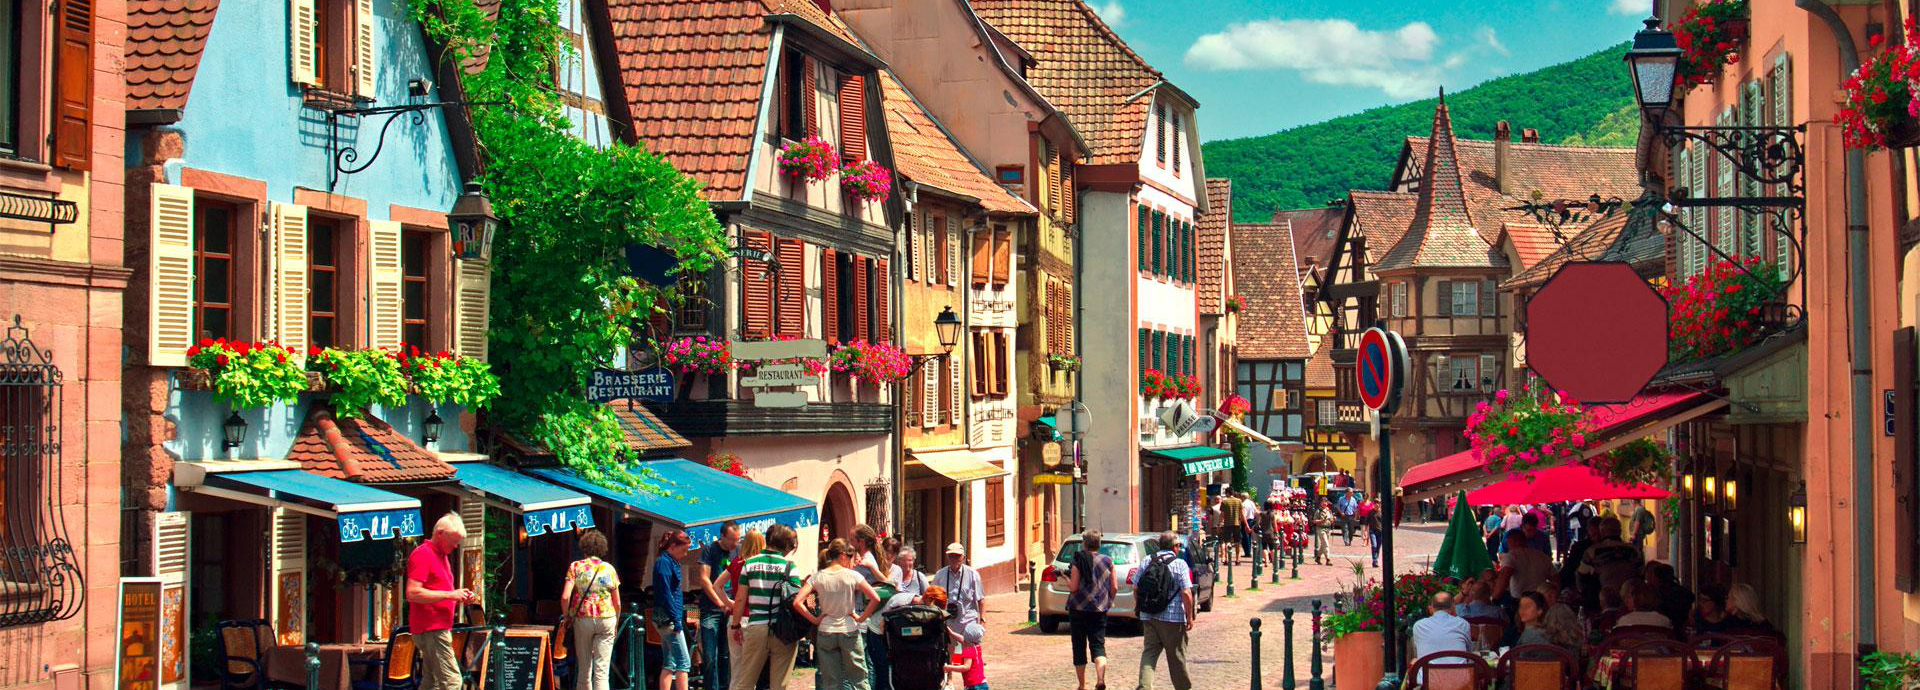 Kaysersberg in Alsace, its picturesque streets